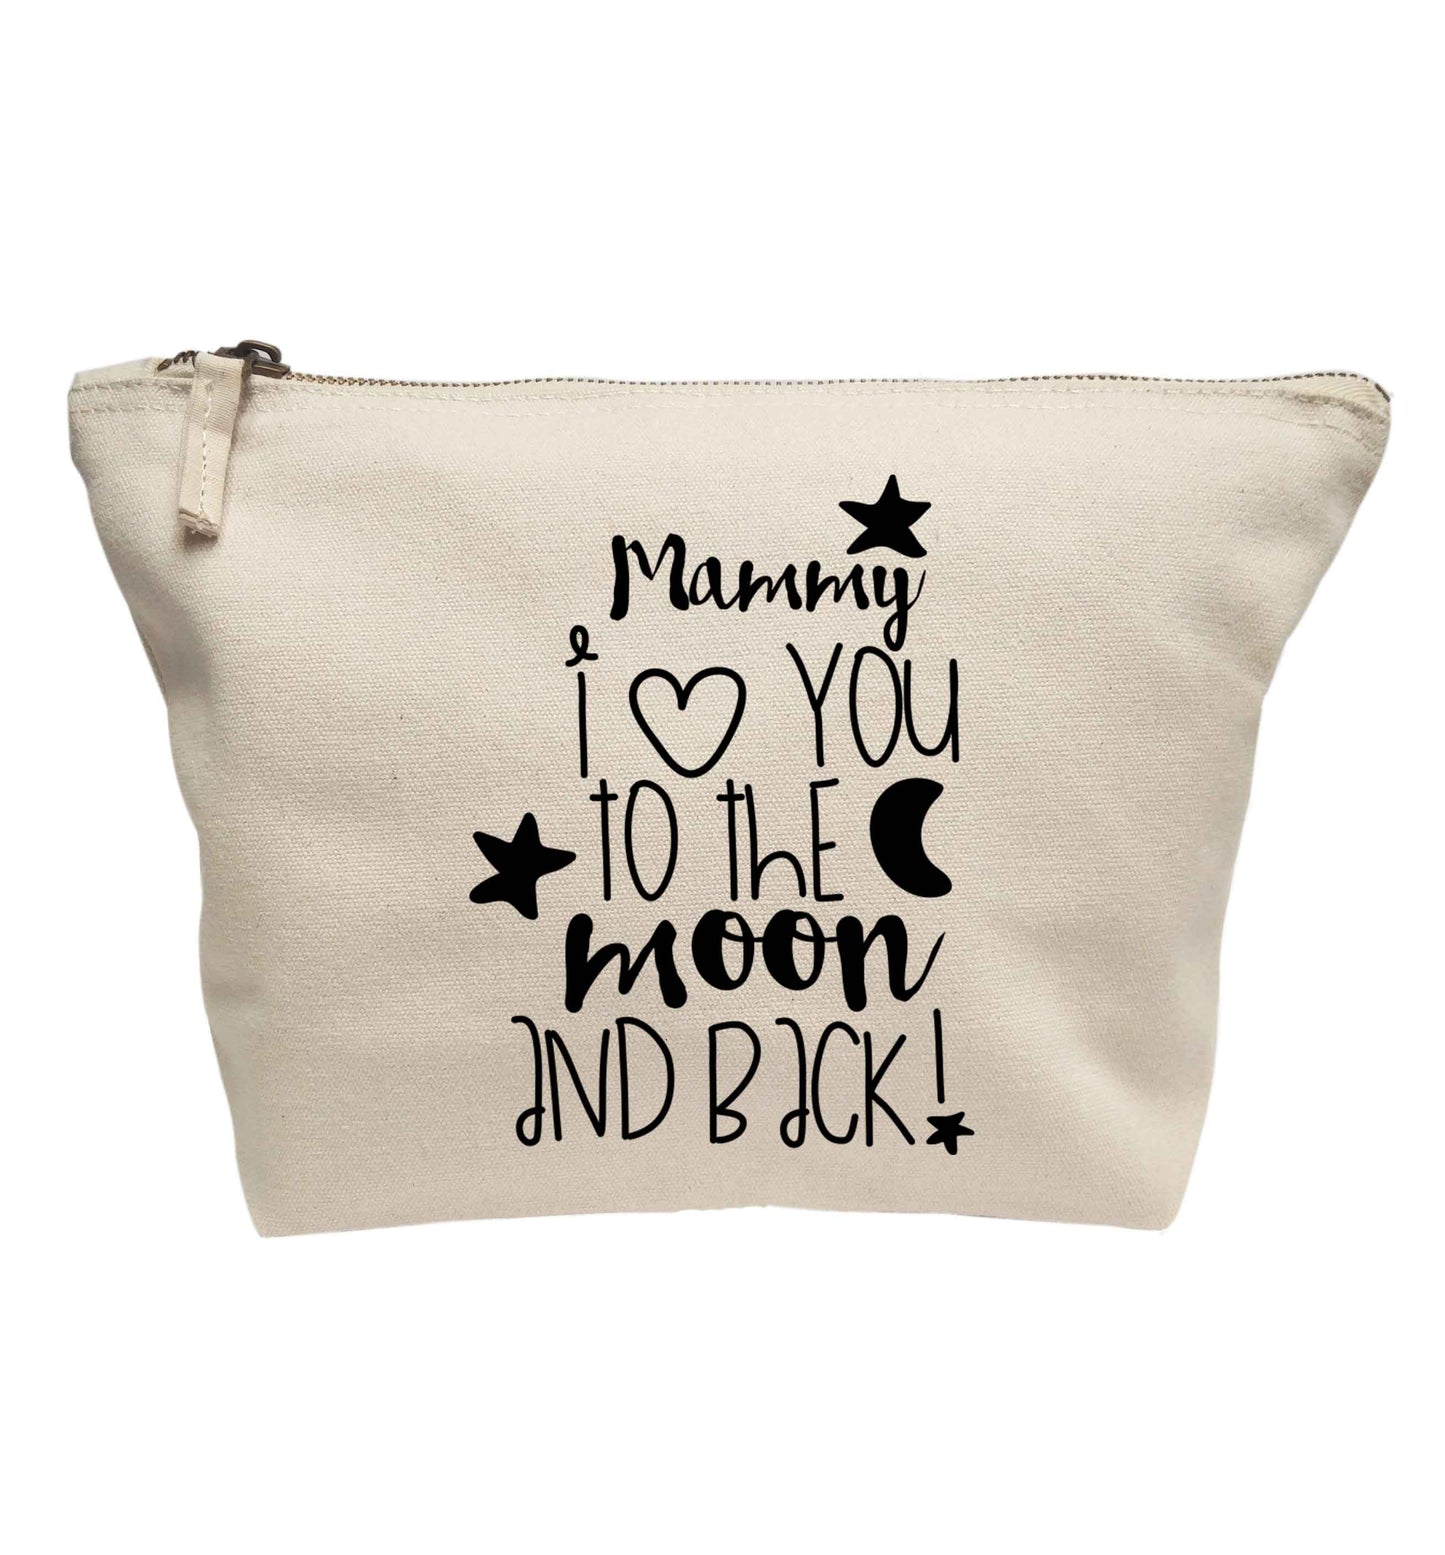 Mammy I love you to the moon and back | Makeup / wash bag